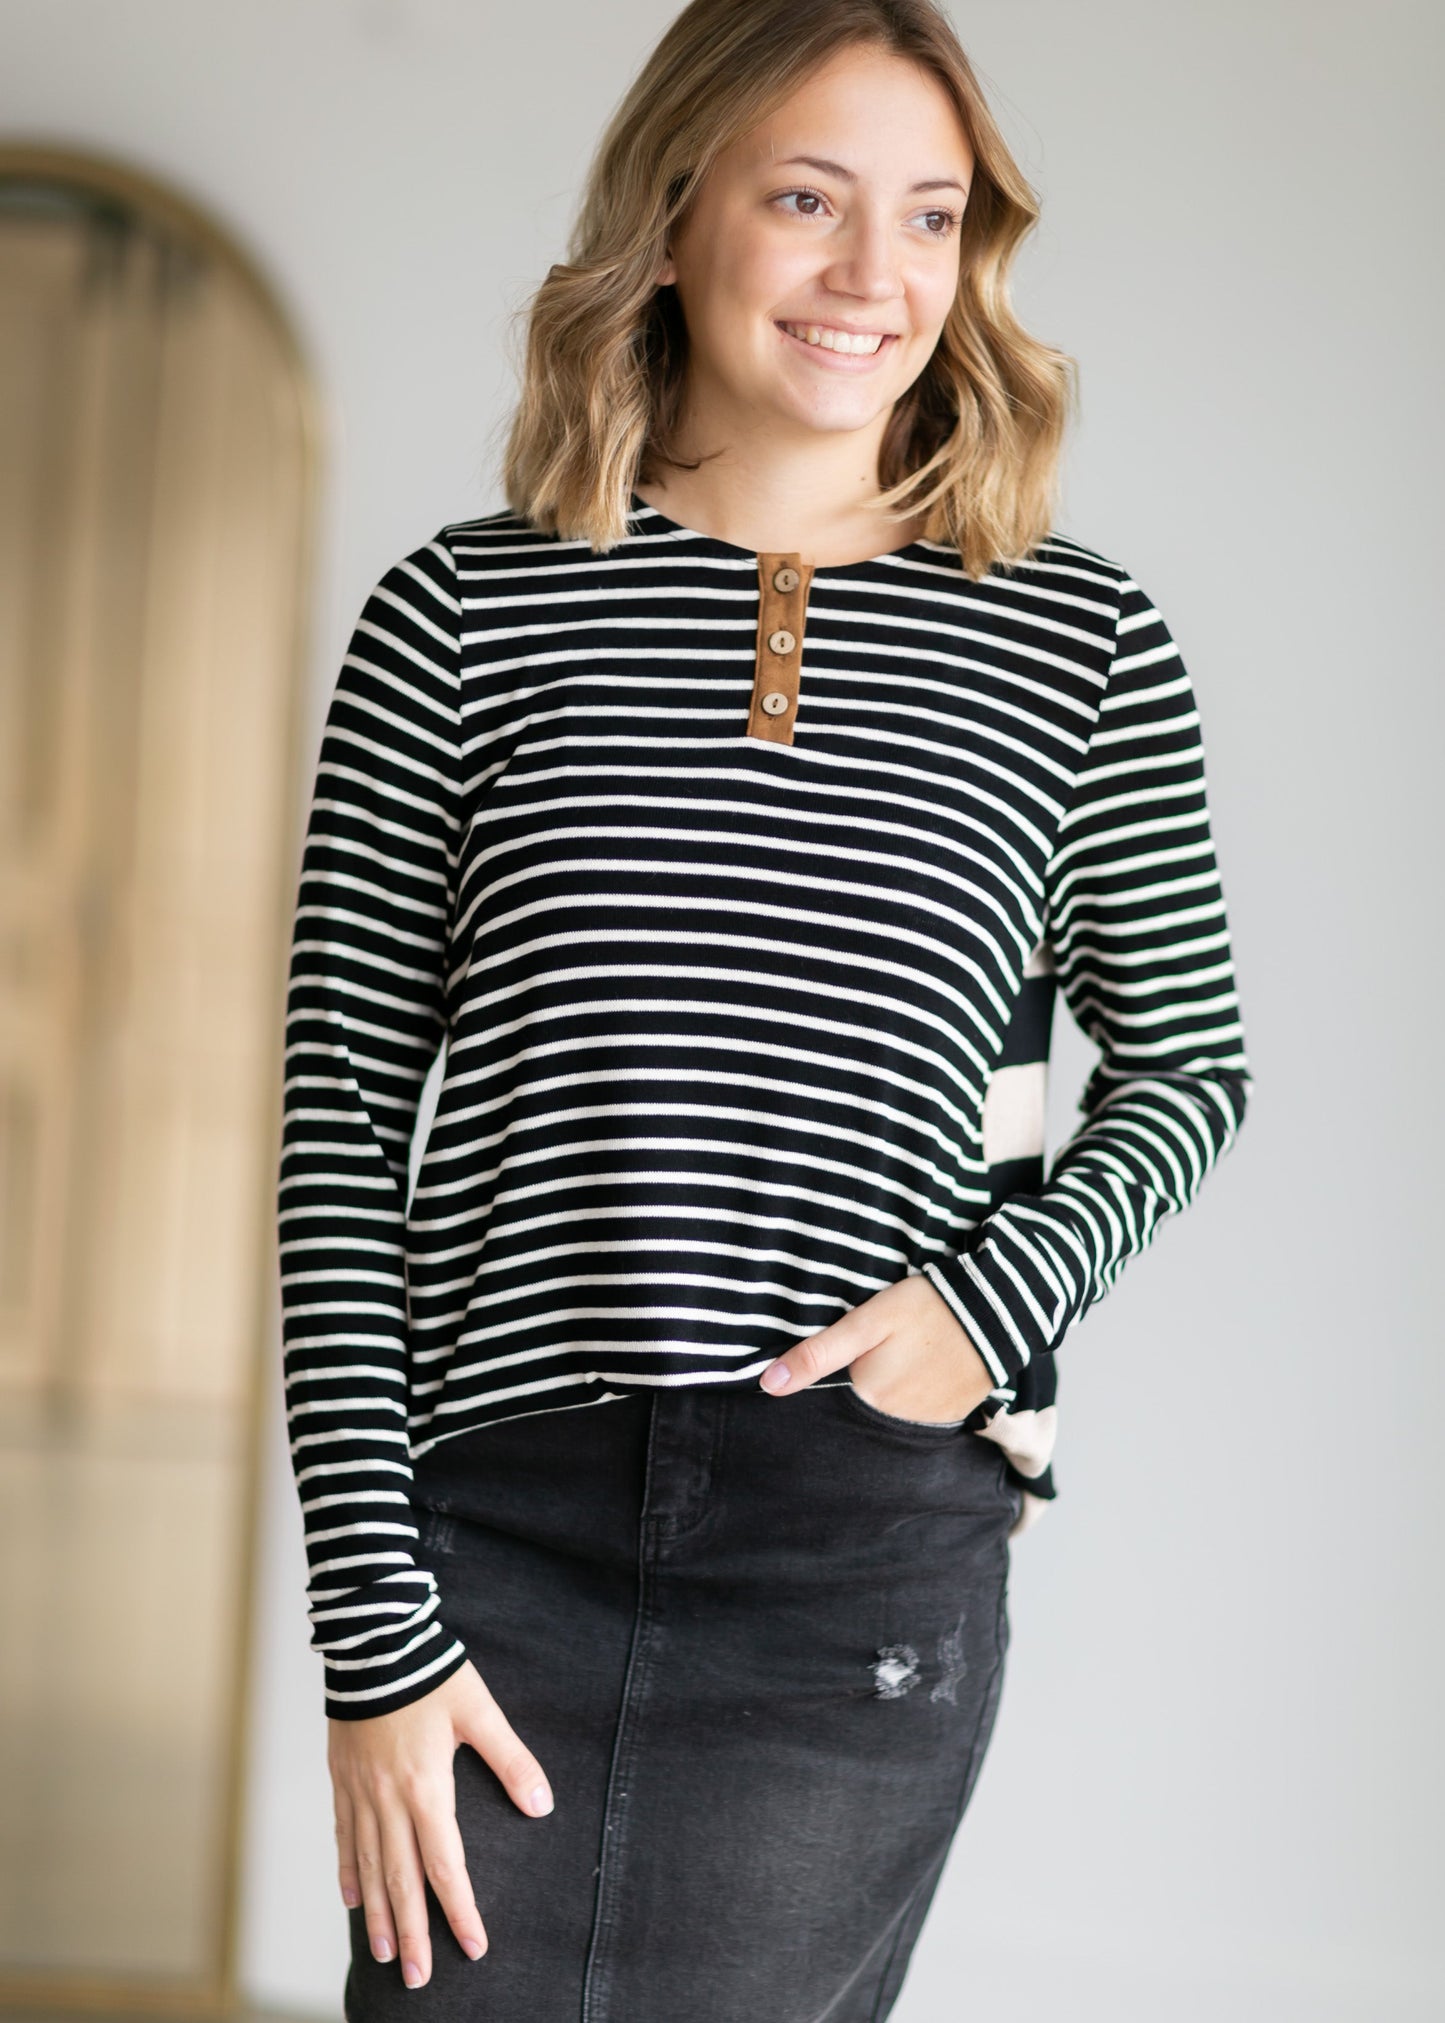 Black Mixed Striped Top - FINAL SALE FF Tops